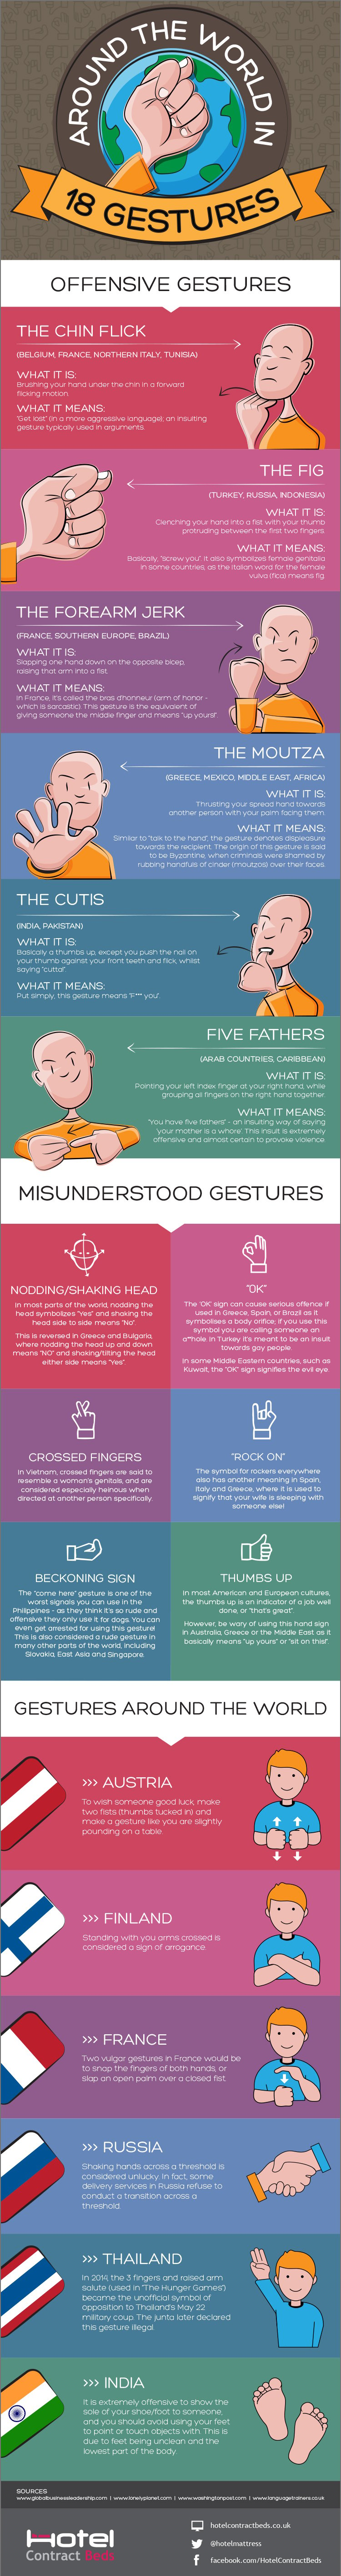 Around The World in 18 Gestures (Infographic)